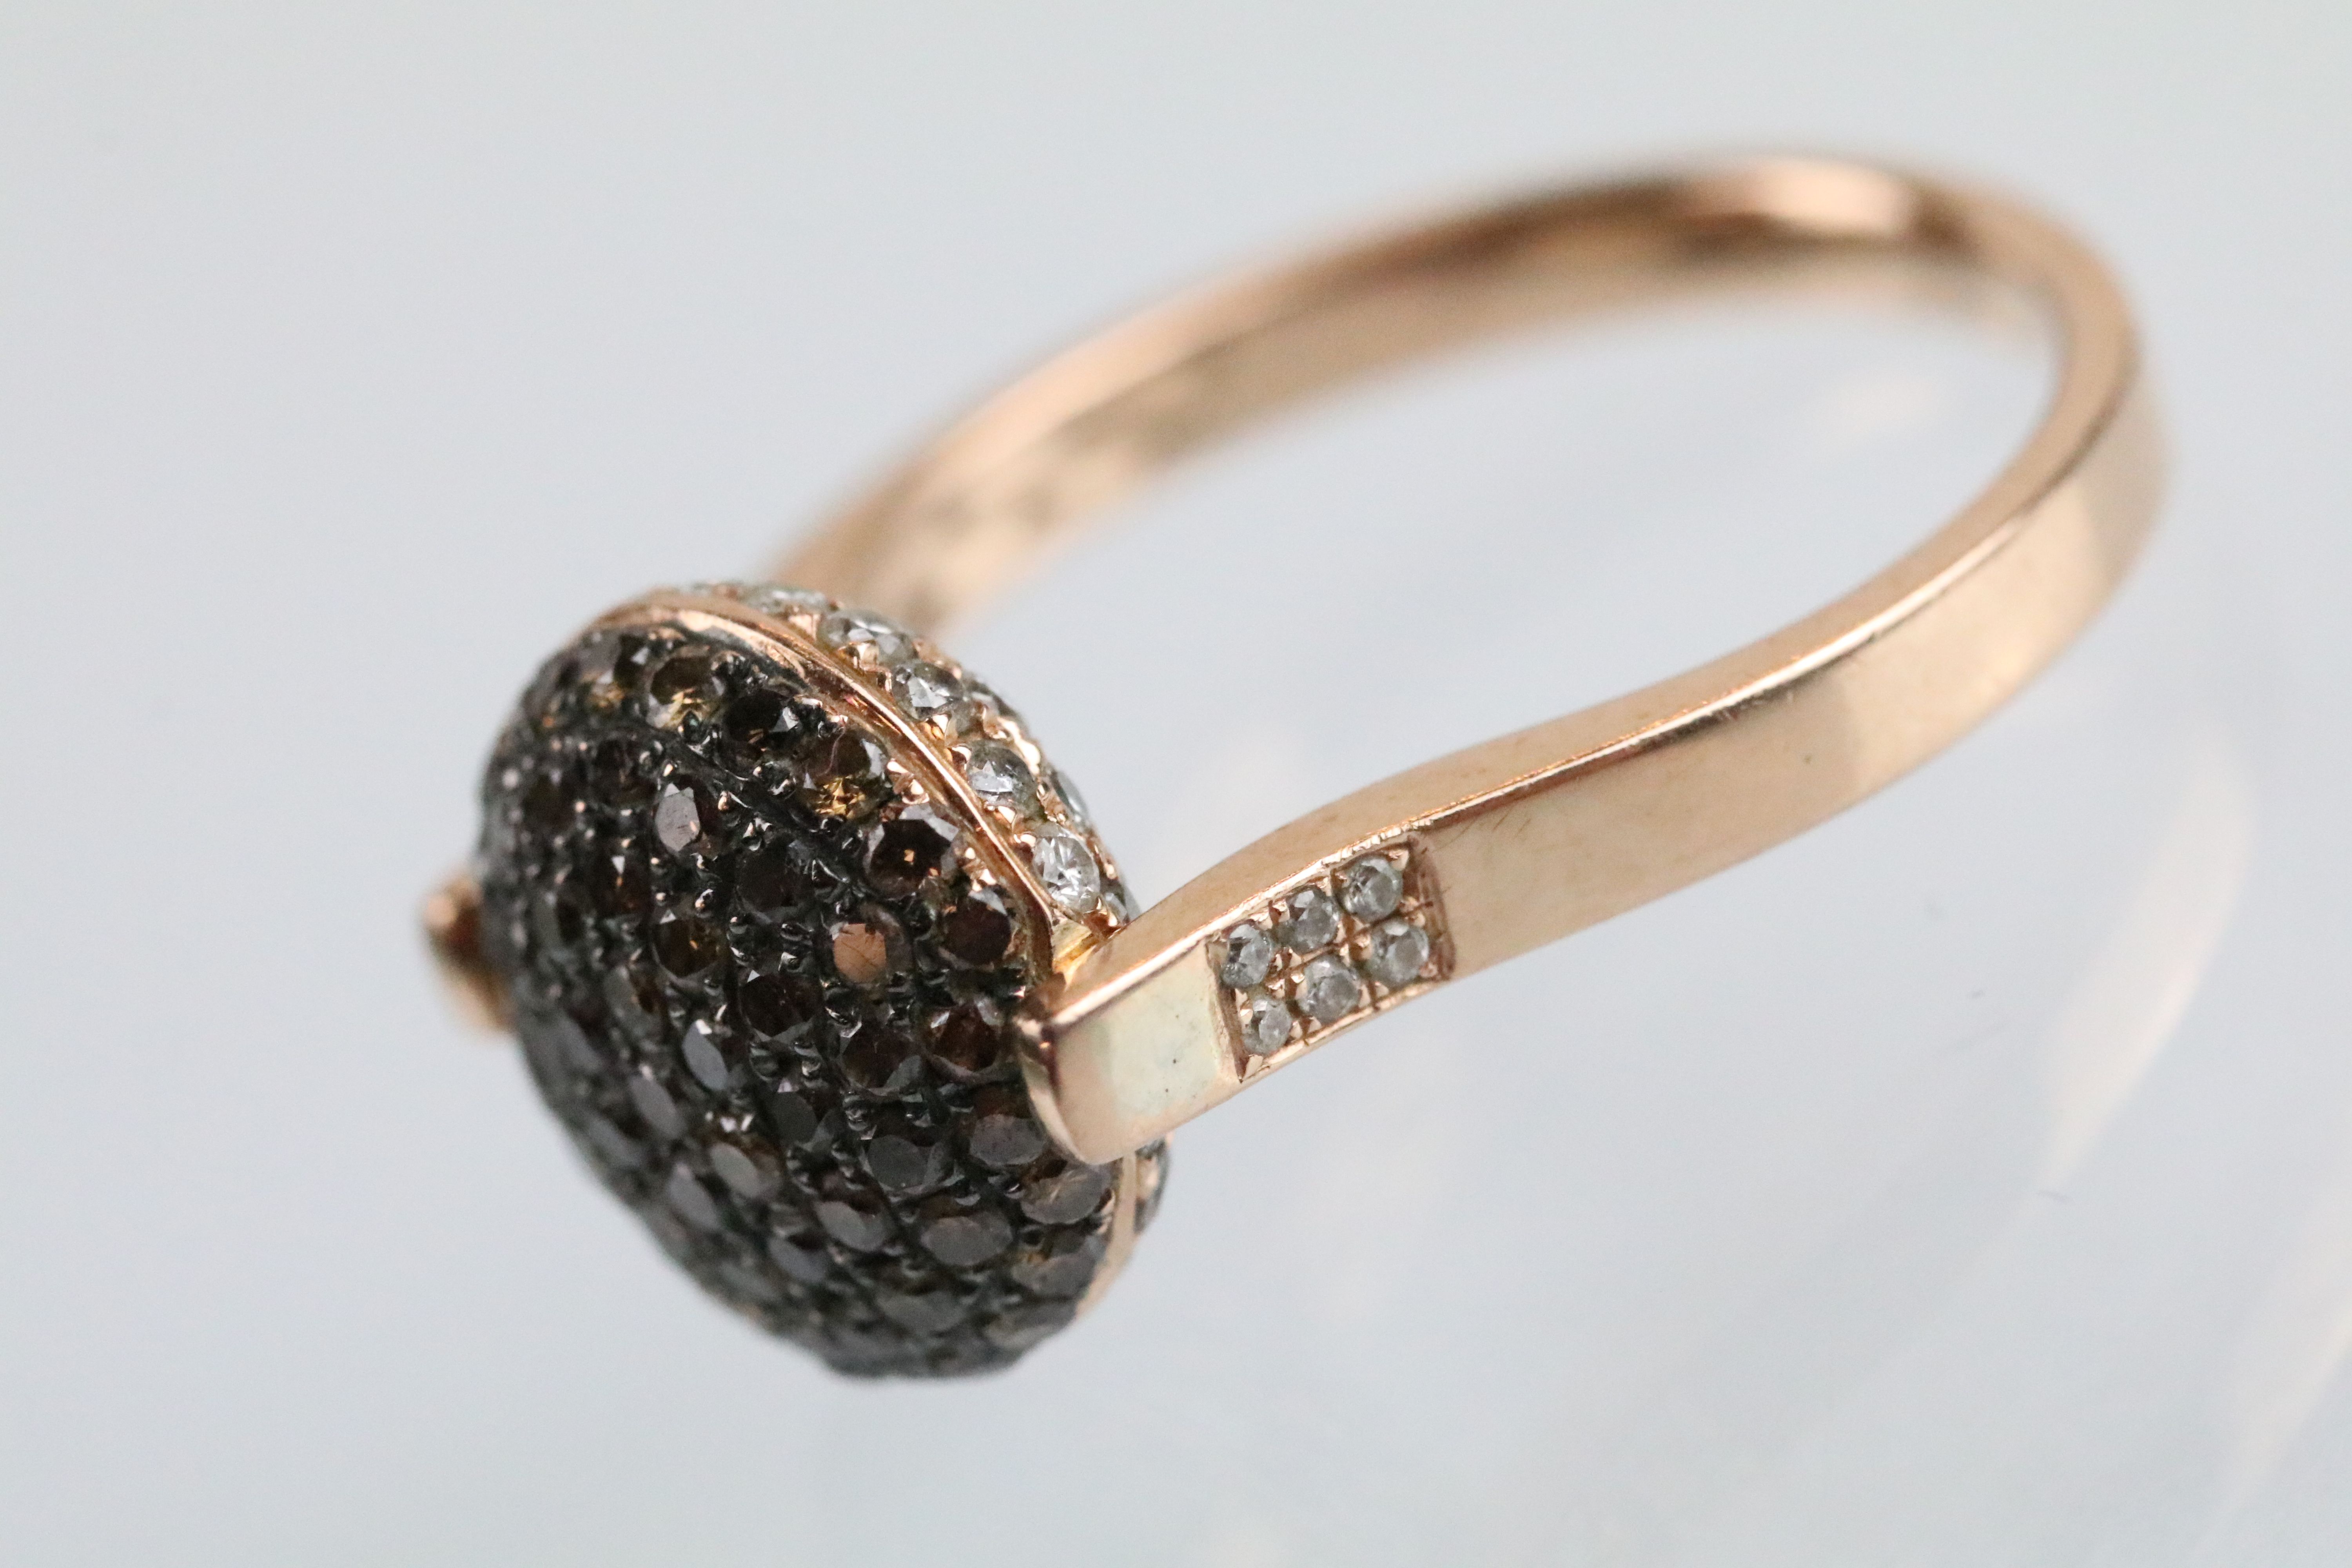 14ct gold and diamond swivel ring. The ring having a round head pave set with round cut diamonds